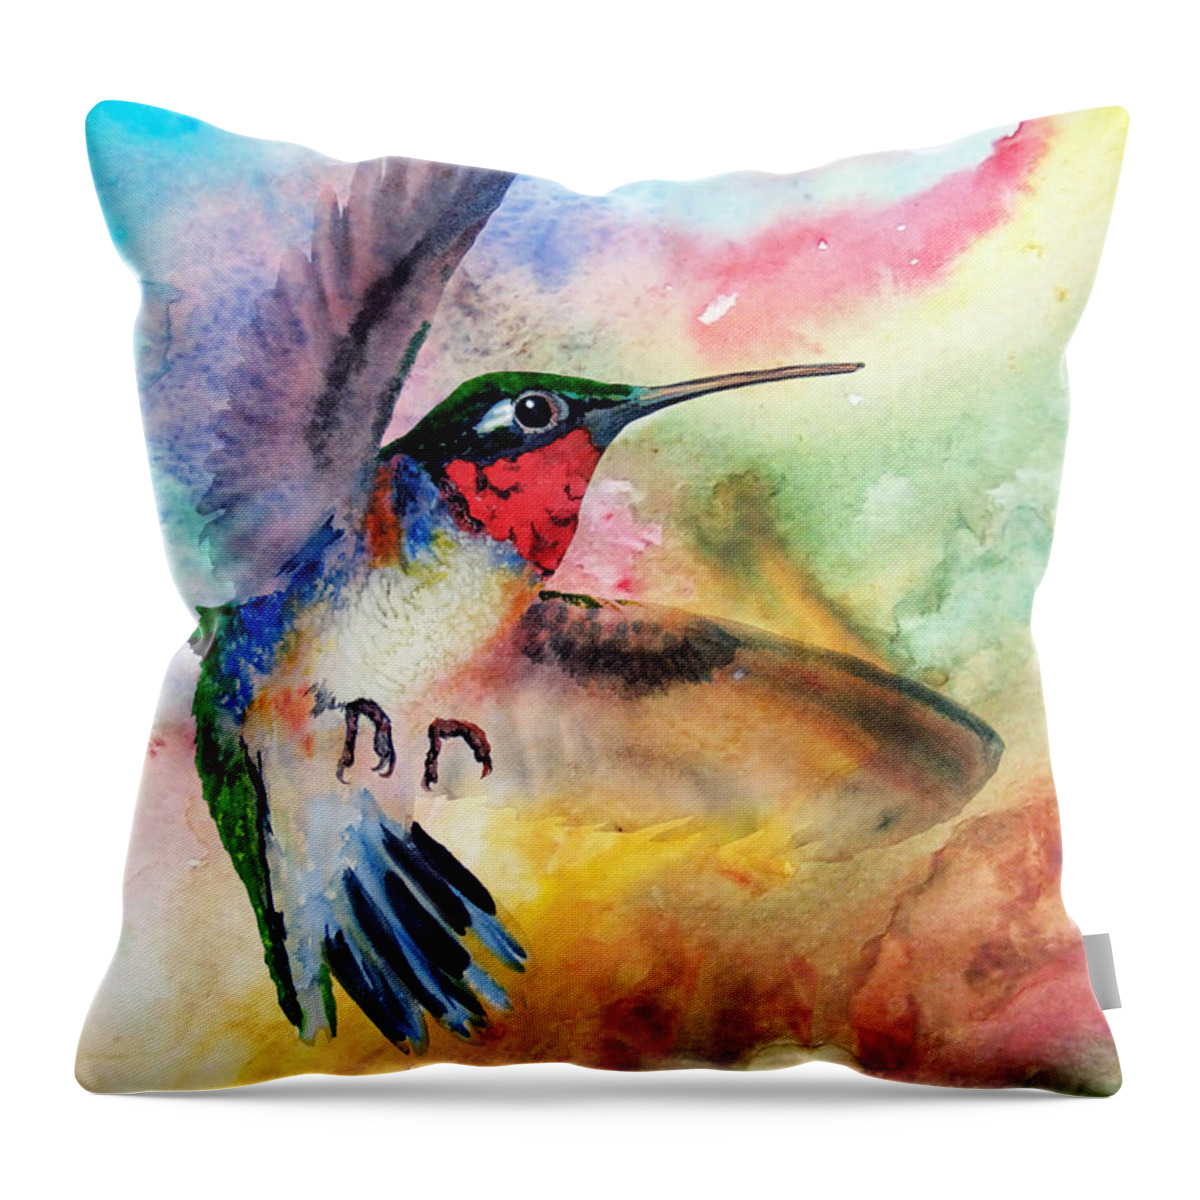 Colorful Throw Pillow featuring the painting DA155 Flit Color by Daniel Adams by Daniel Adams